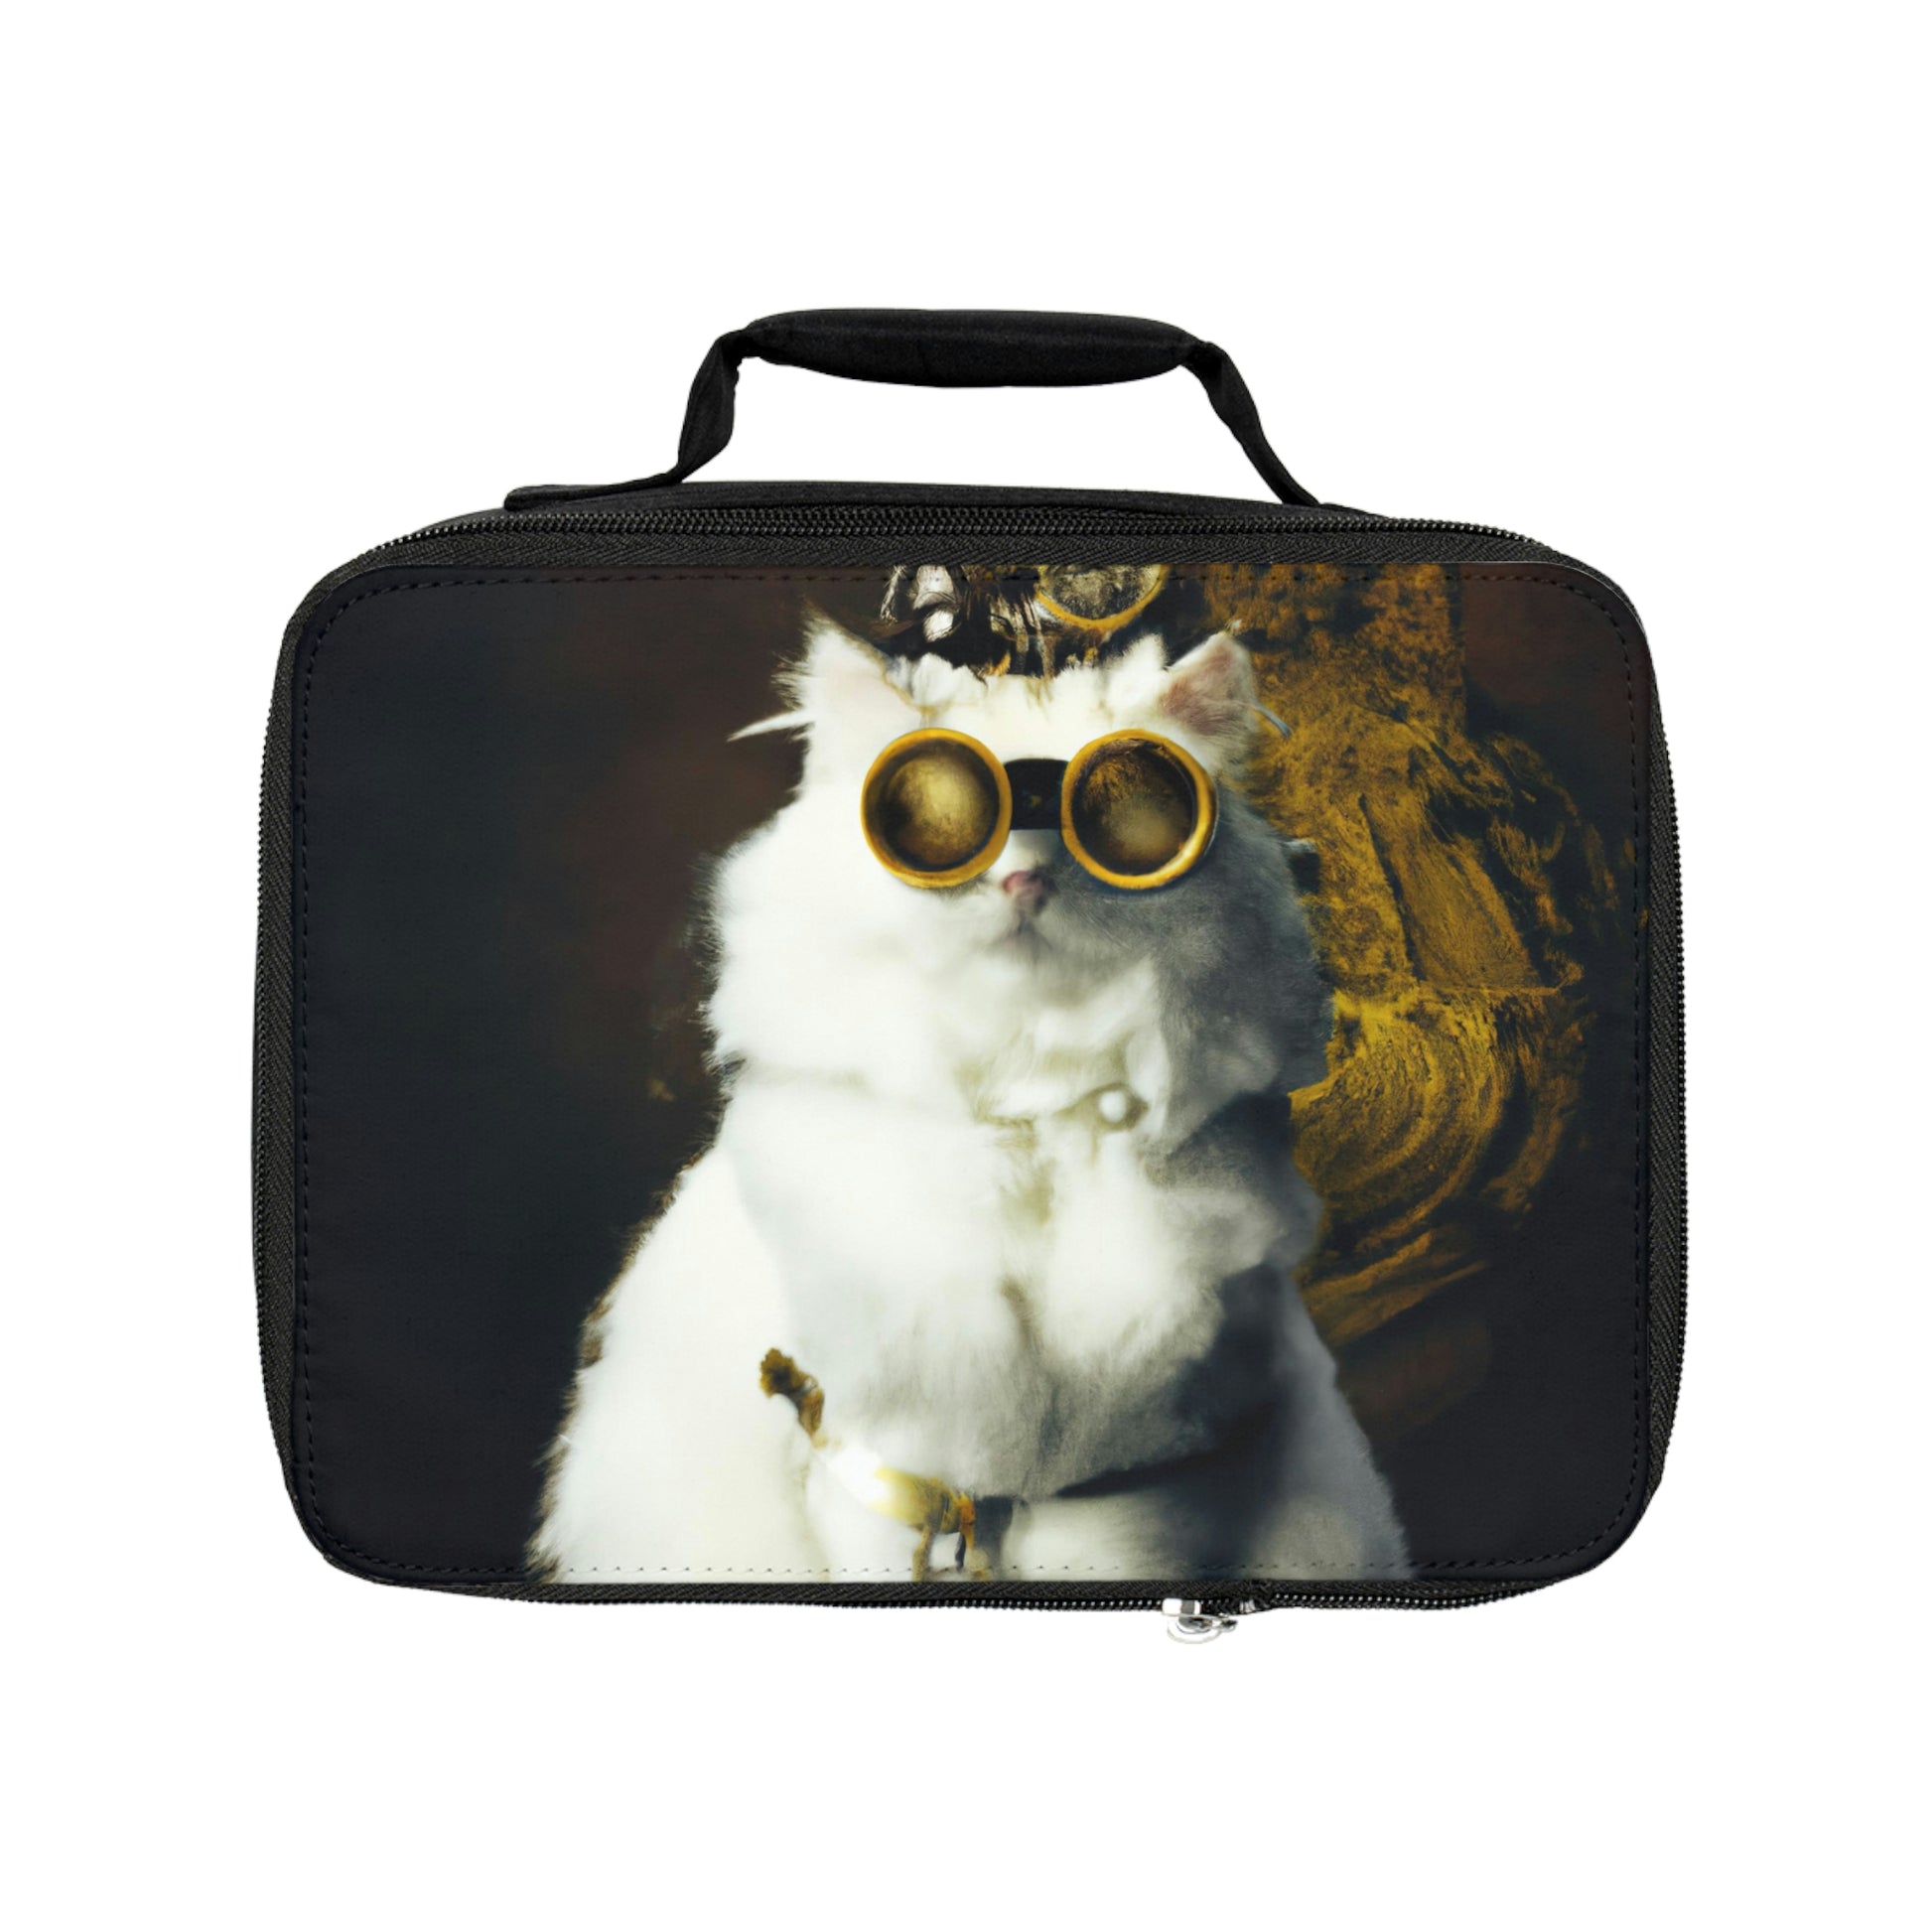 Steampunk Persian cat Lunch Bag, cyberpunk white cat Lunch tote, Victorian Lunch Bag, back to School lunch bag, vintage Picnic bag gift